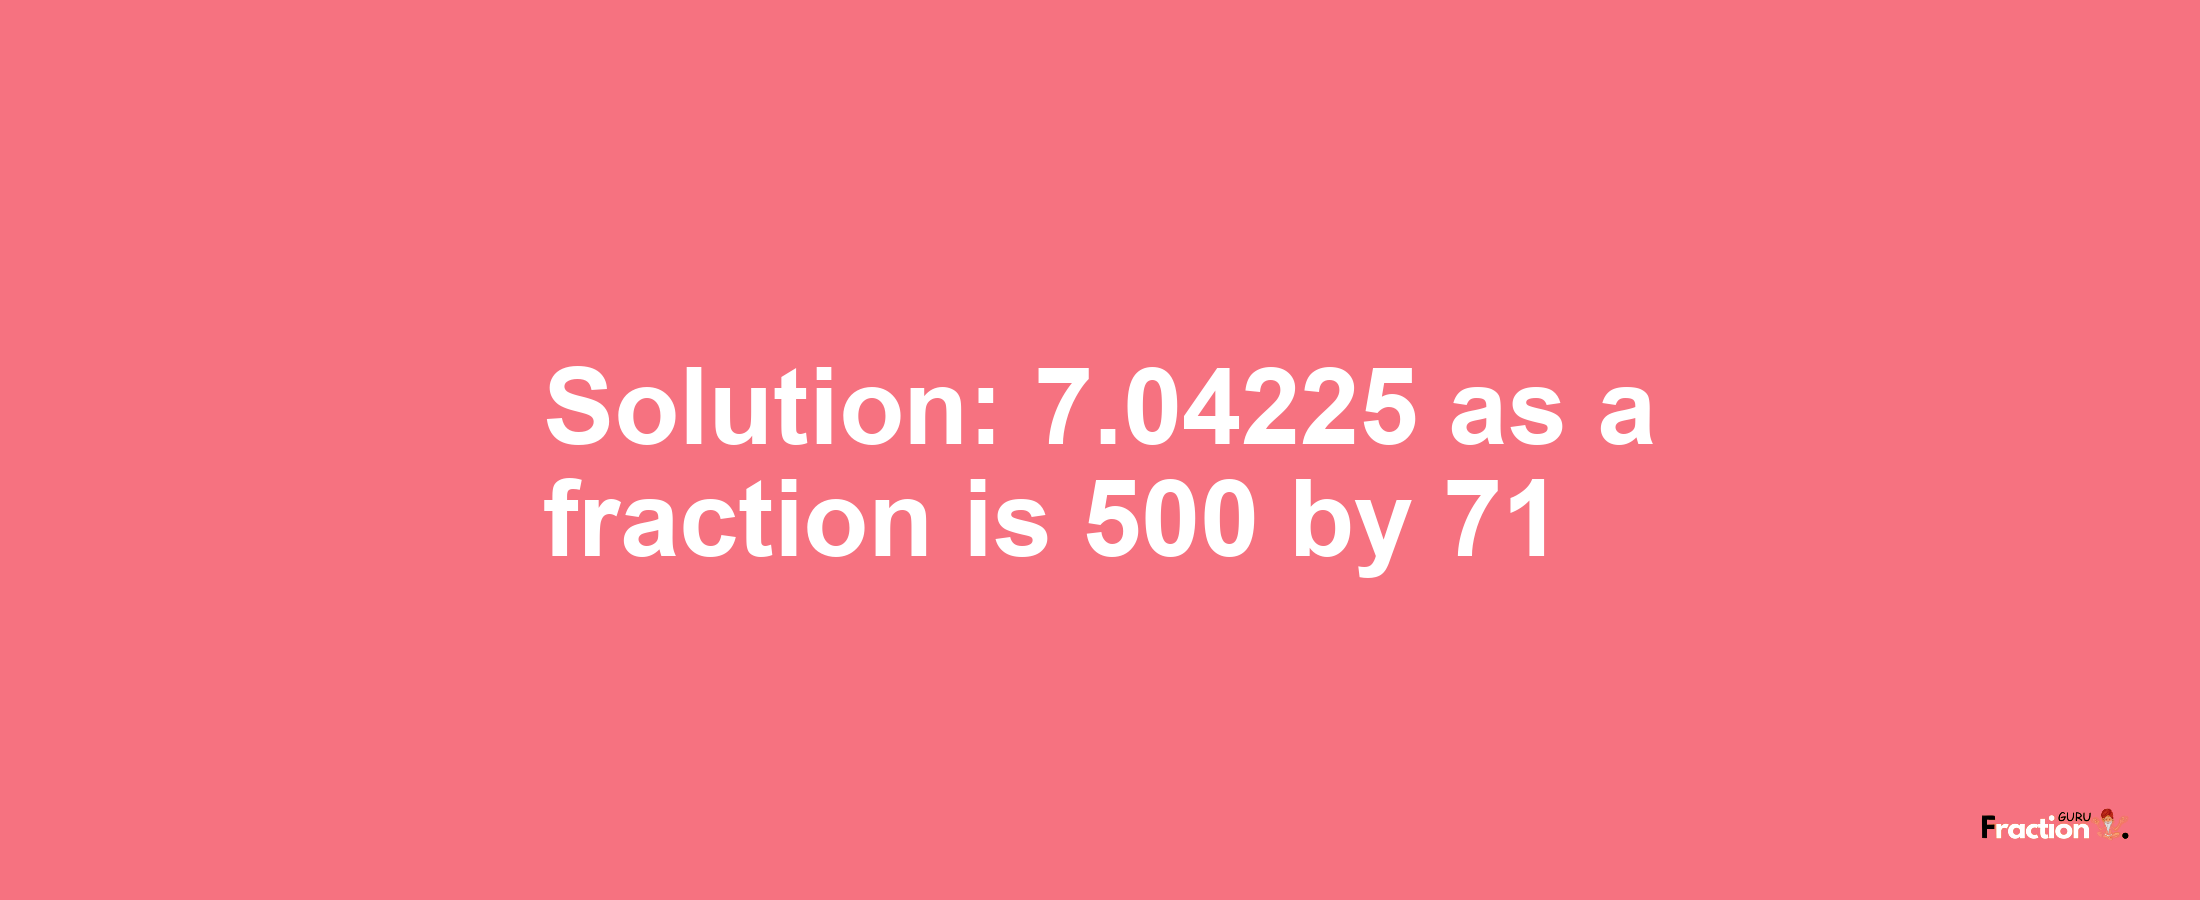 Solution:7.04225 as a fraction is 500/71